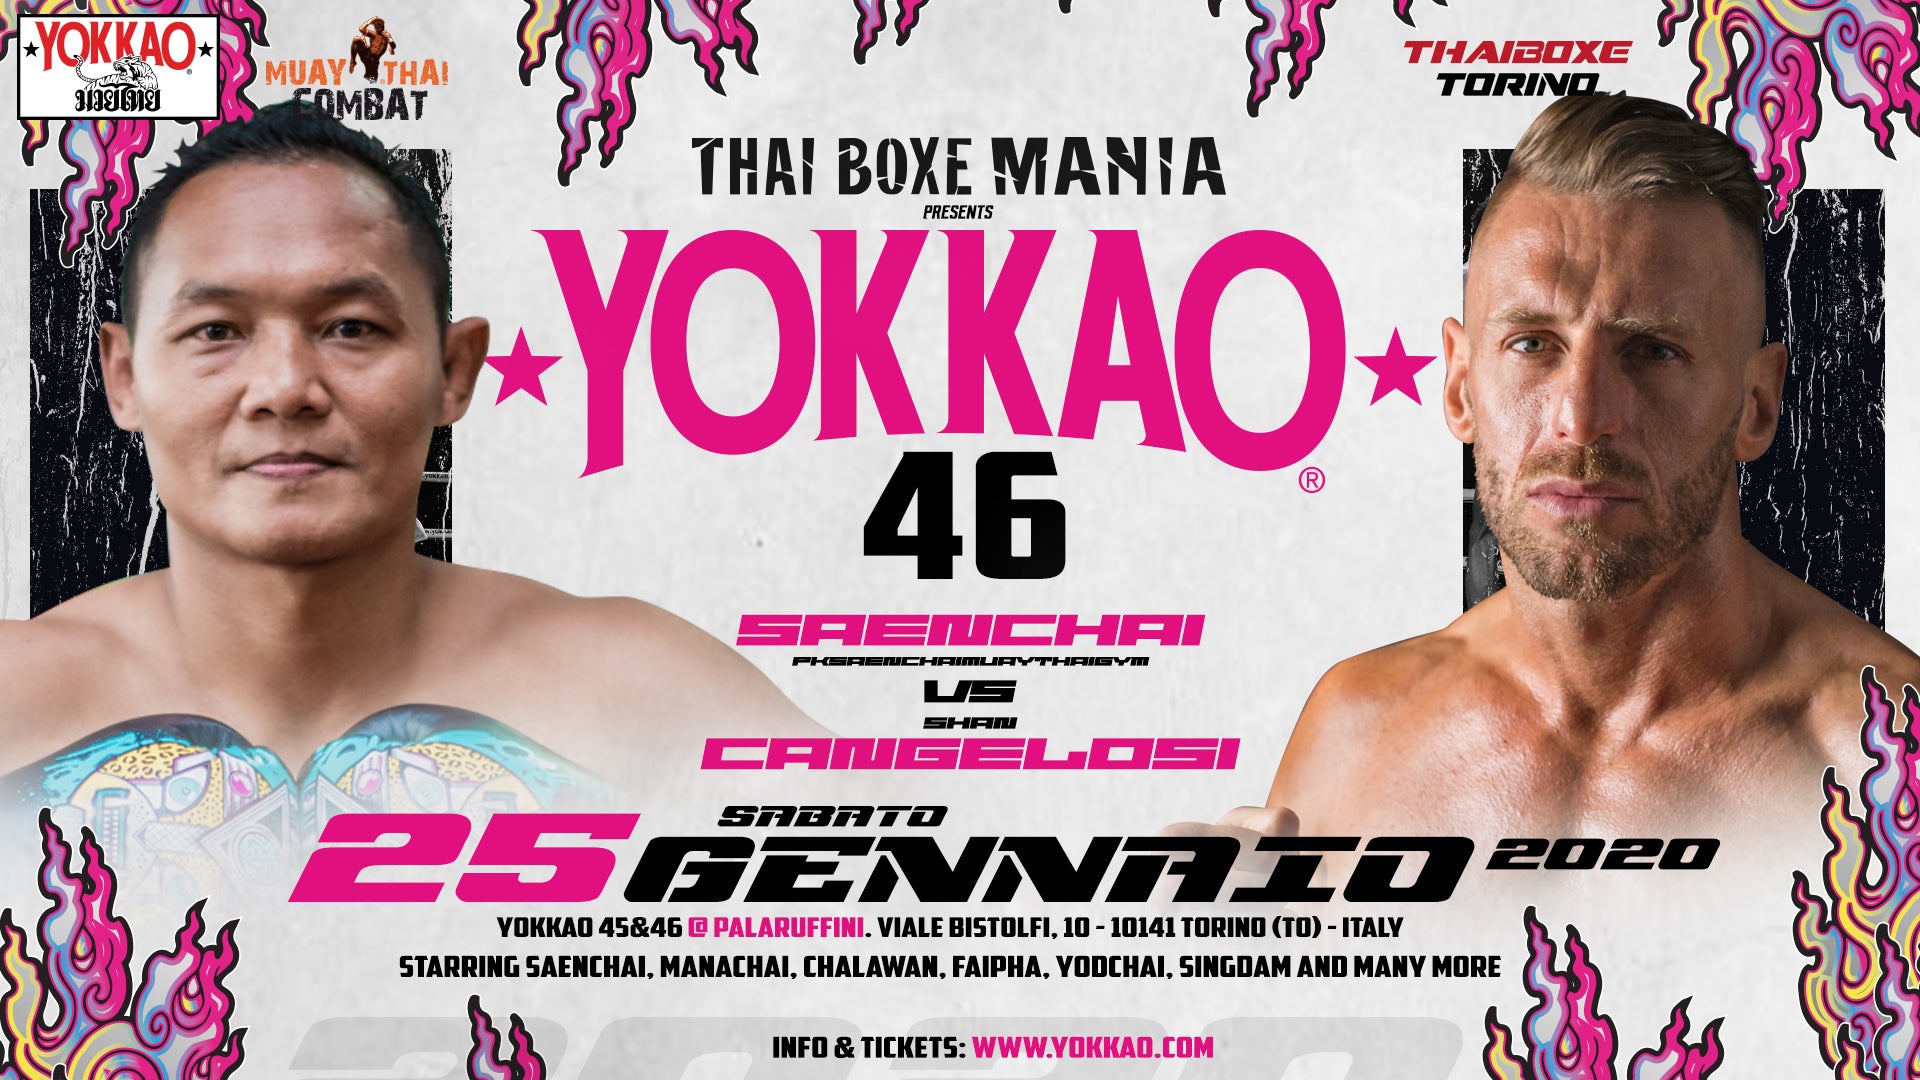 FIRST FIGHT ANNOUNCED: SAENCHAI VS CANGELOSI 2 IN TURIN!